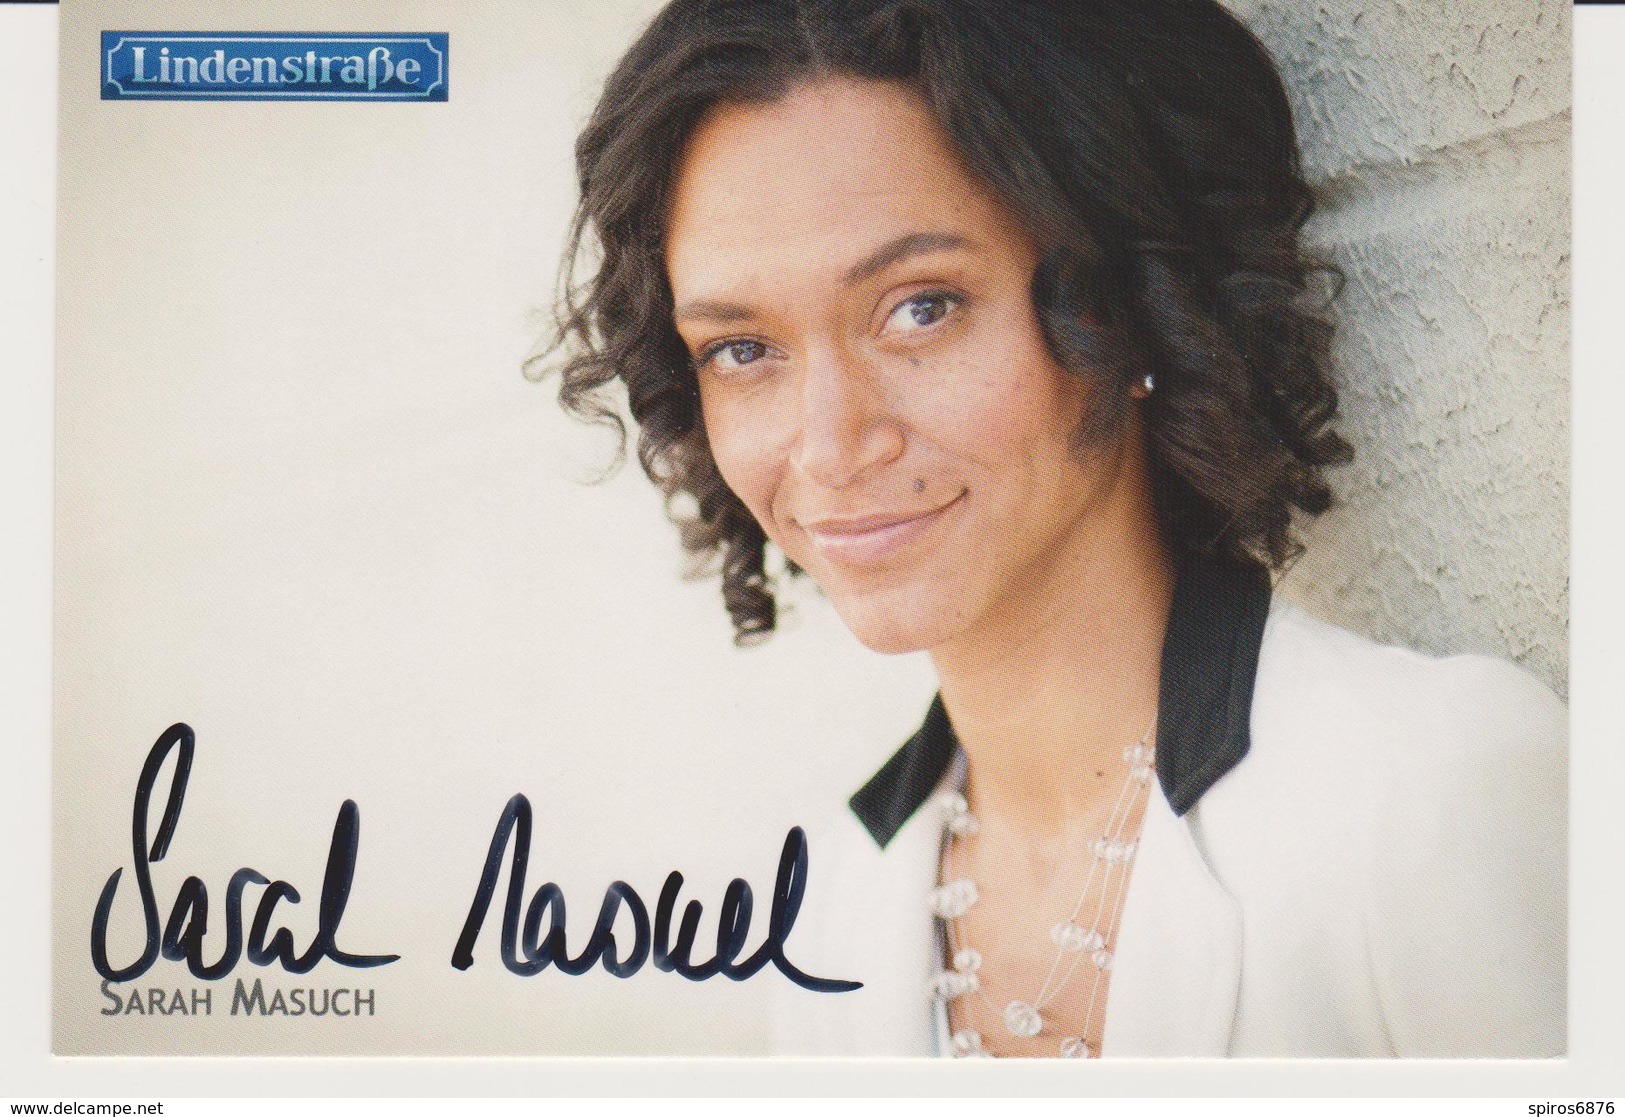 Authentic Signed Card / Autograph -  Actress SARAH MASUCH - German TV Series Lindenstrasse - Autographes